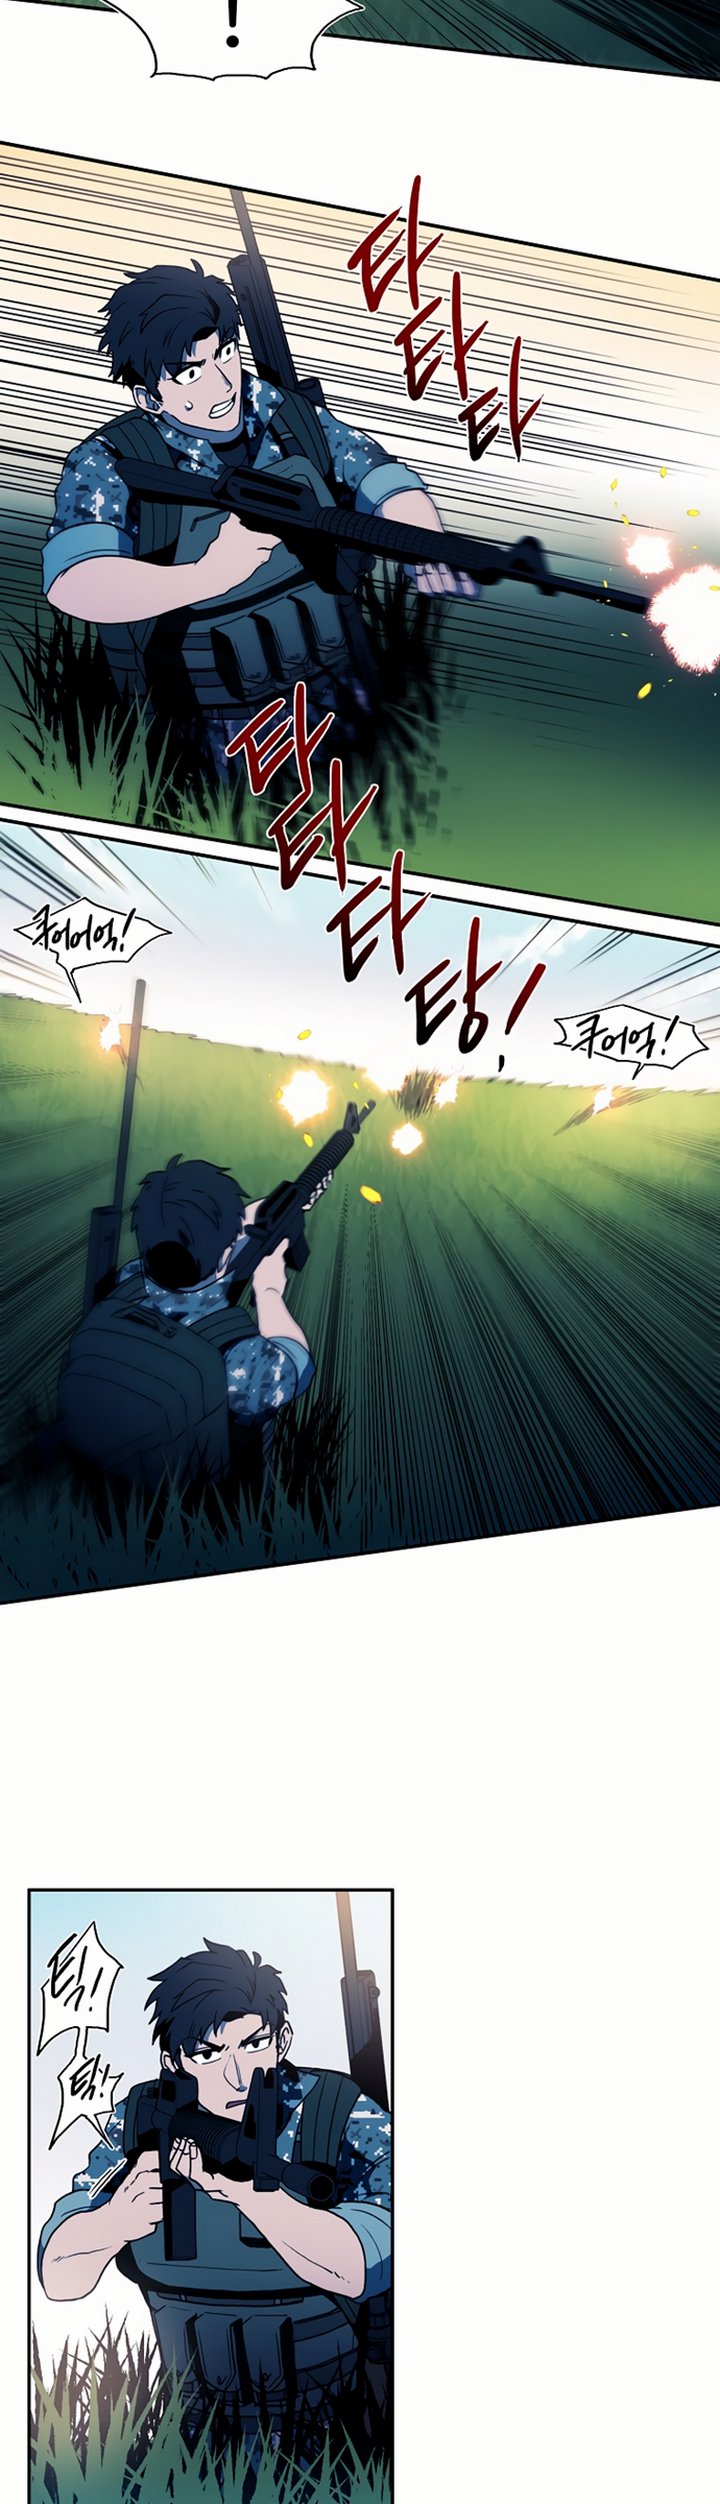 Magical Shooting: Sniper of Steel Chapter 05.2